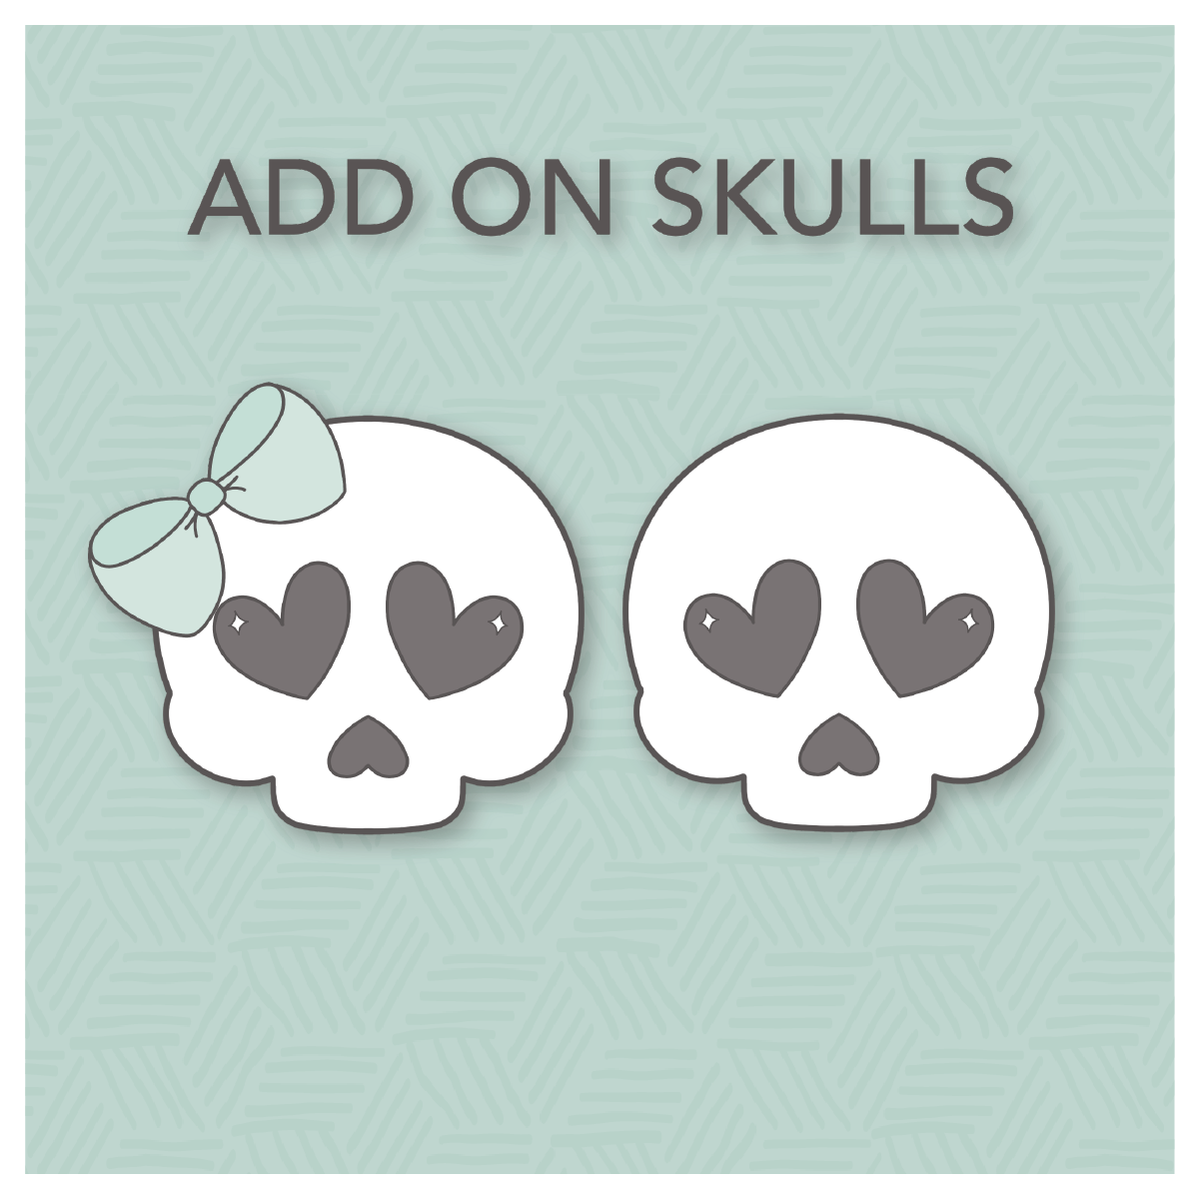 ADD ON SKULLS for the Build A Skeleton Cookie Cutter Set